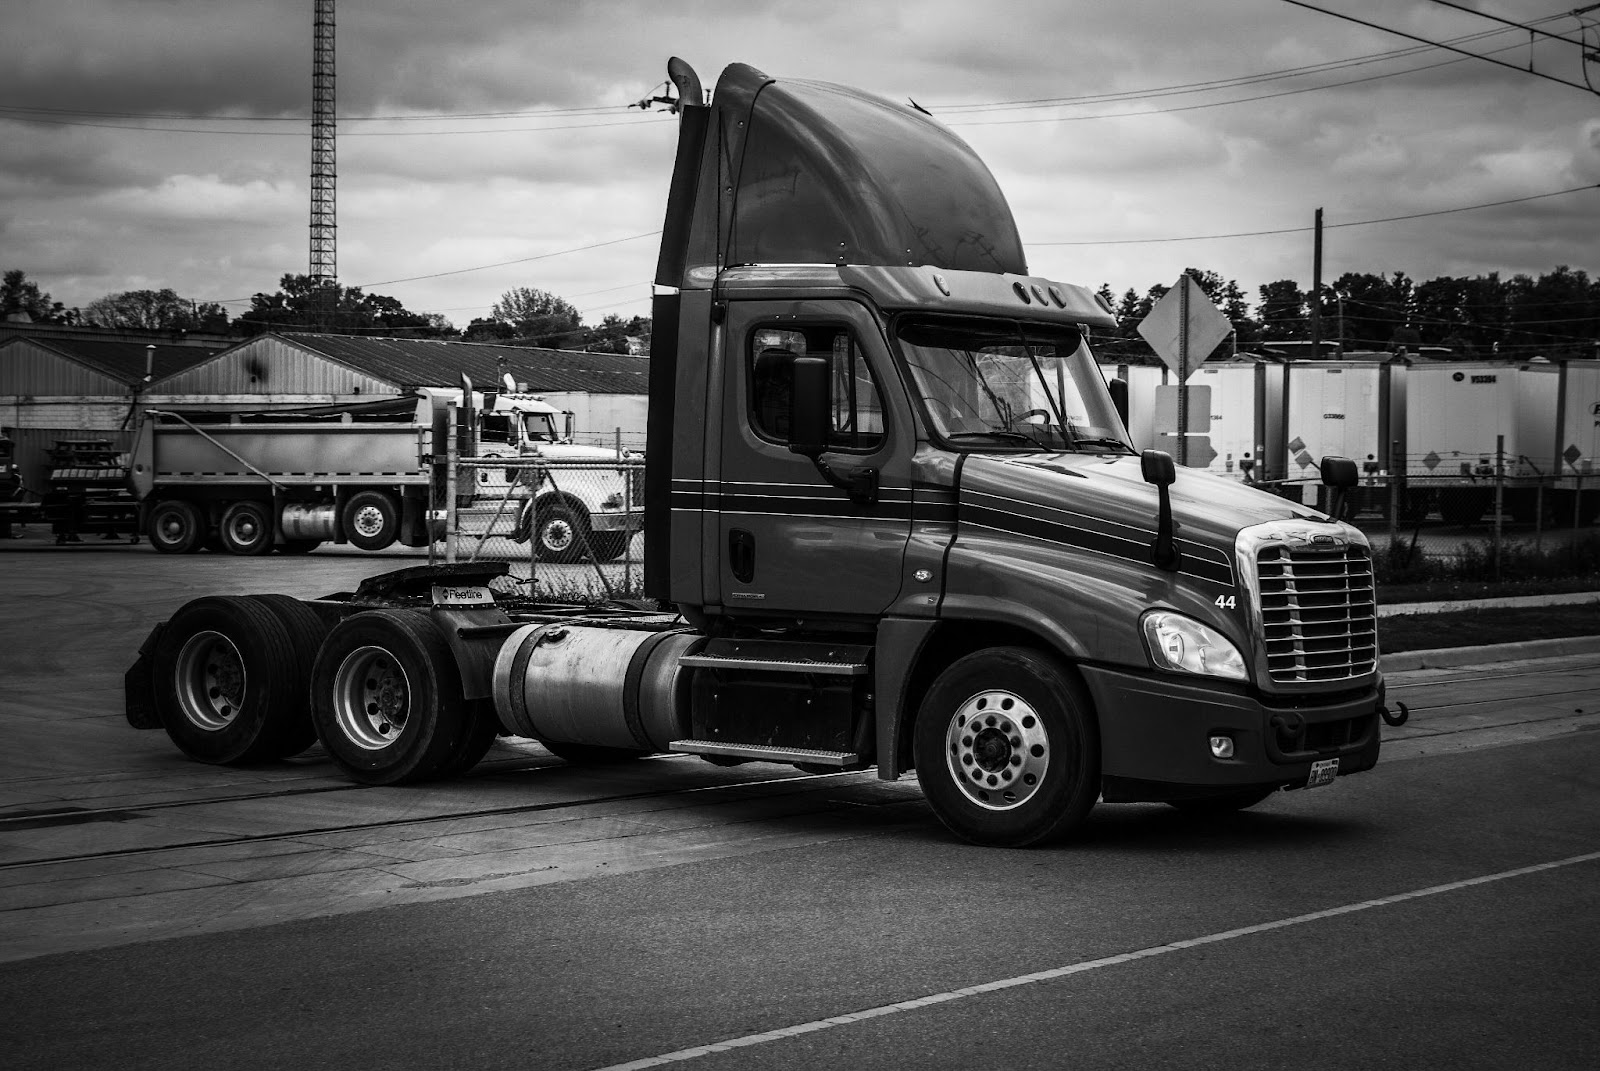 A day cab semi truck in a black-and-white style photo